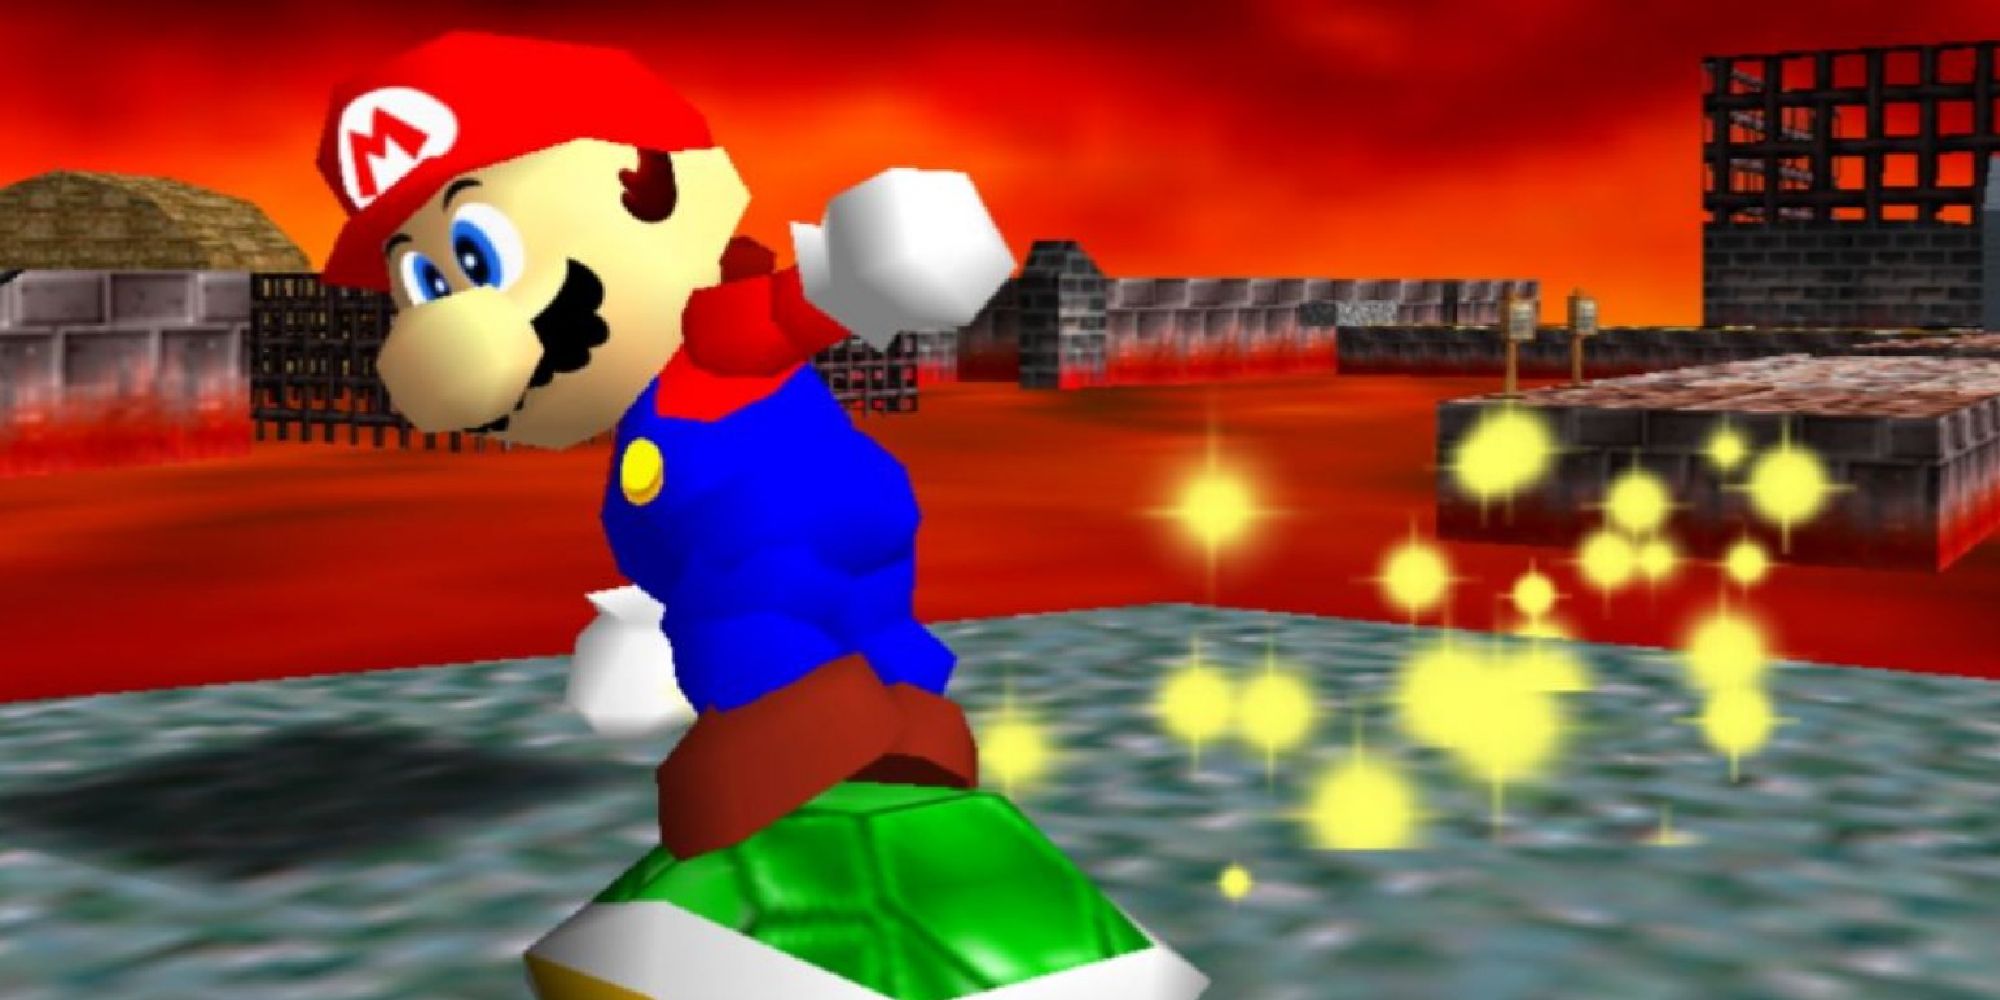 Mario riding on a Koopa shell in a lava level in Super Mario 64